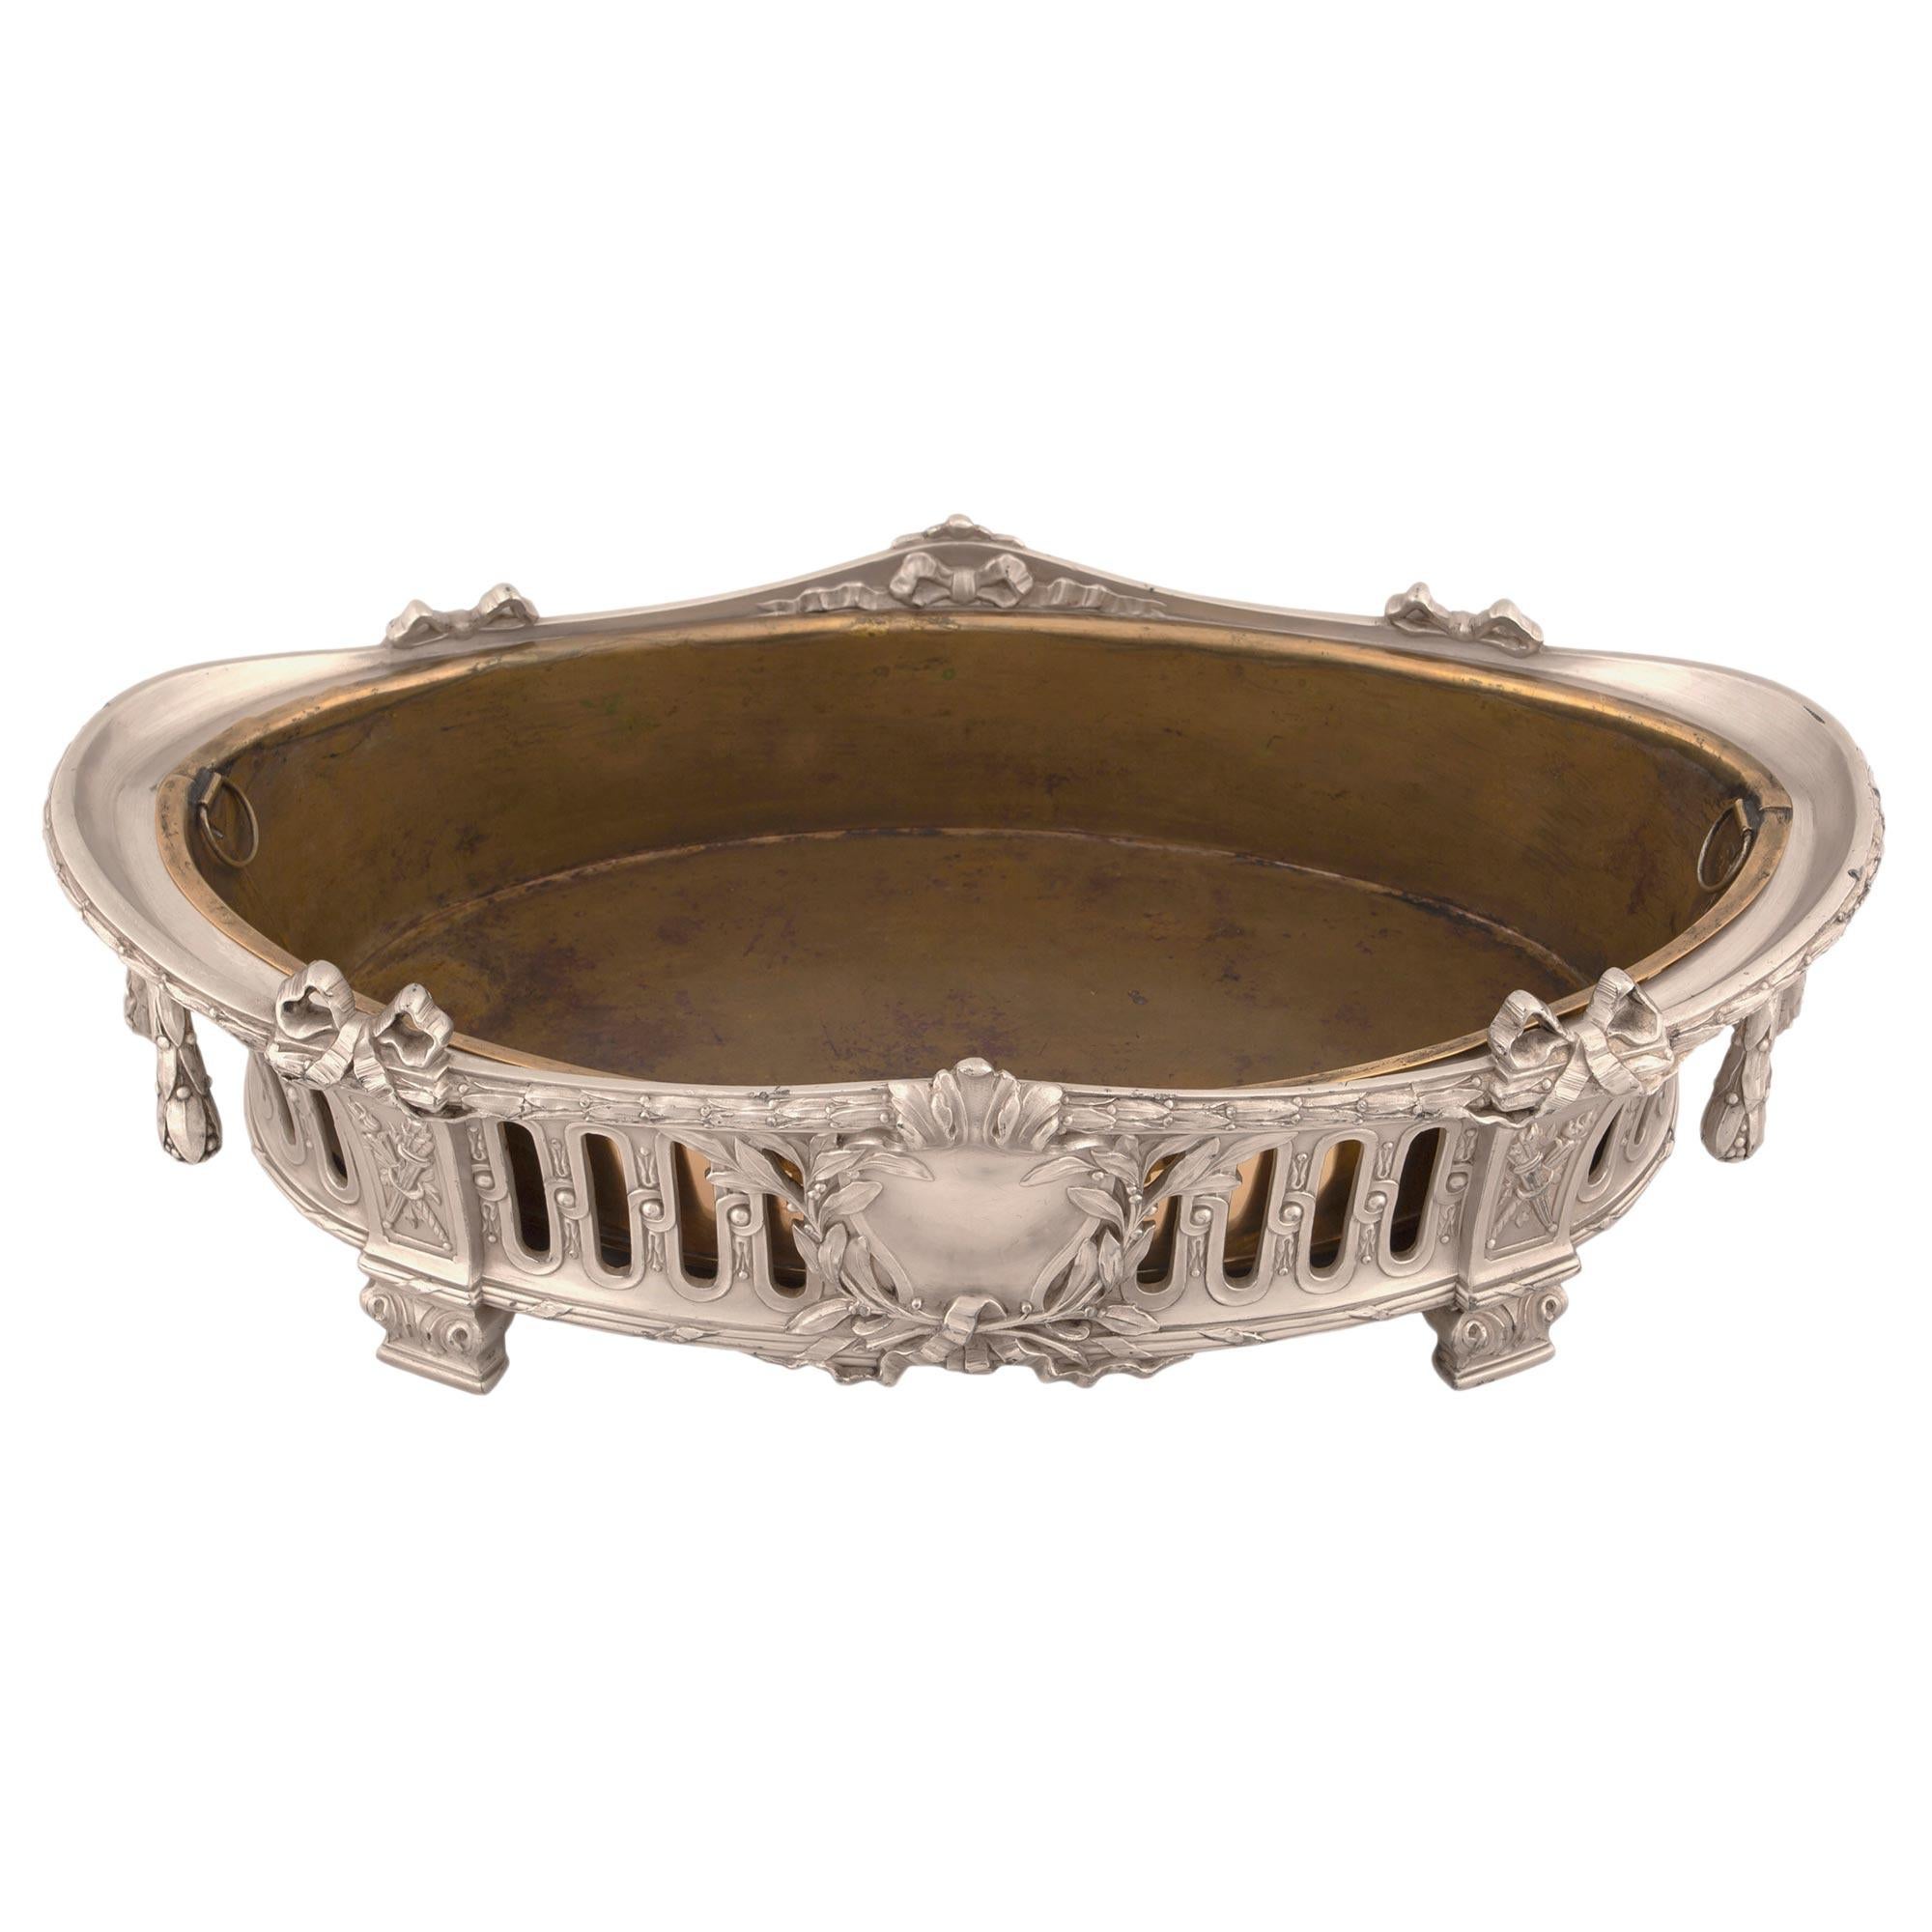 An elegant French 19th century Louis XVI st. silvered bronze centerpiece with its original copper insert. The centerpiece is raised by foliate designed rectangular feet below a detailed quiver and eternal flame with a tied reeded band. At the center